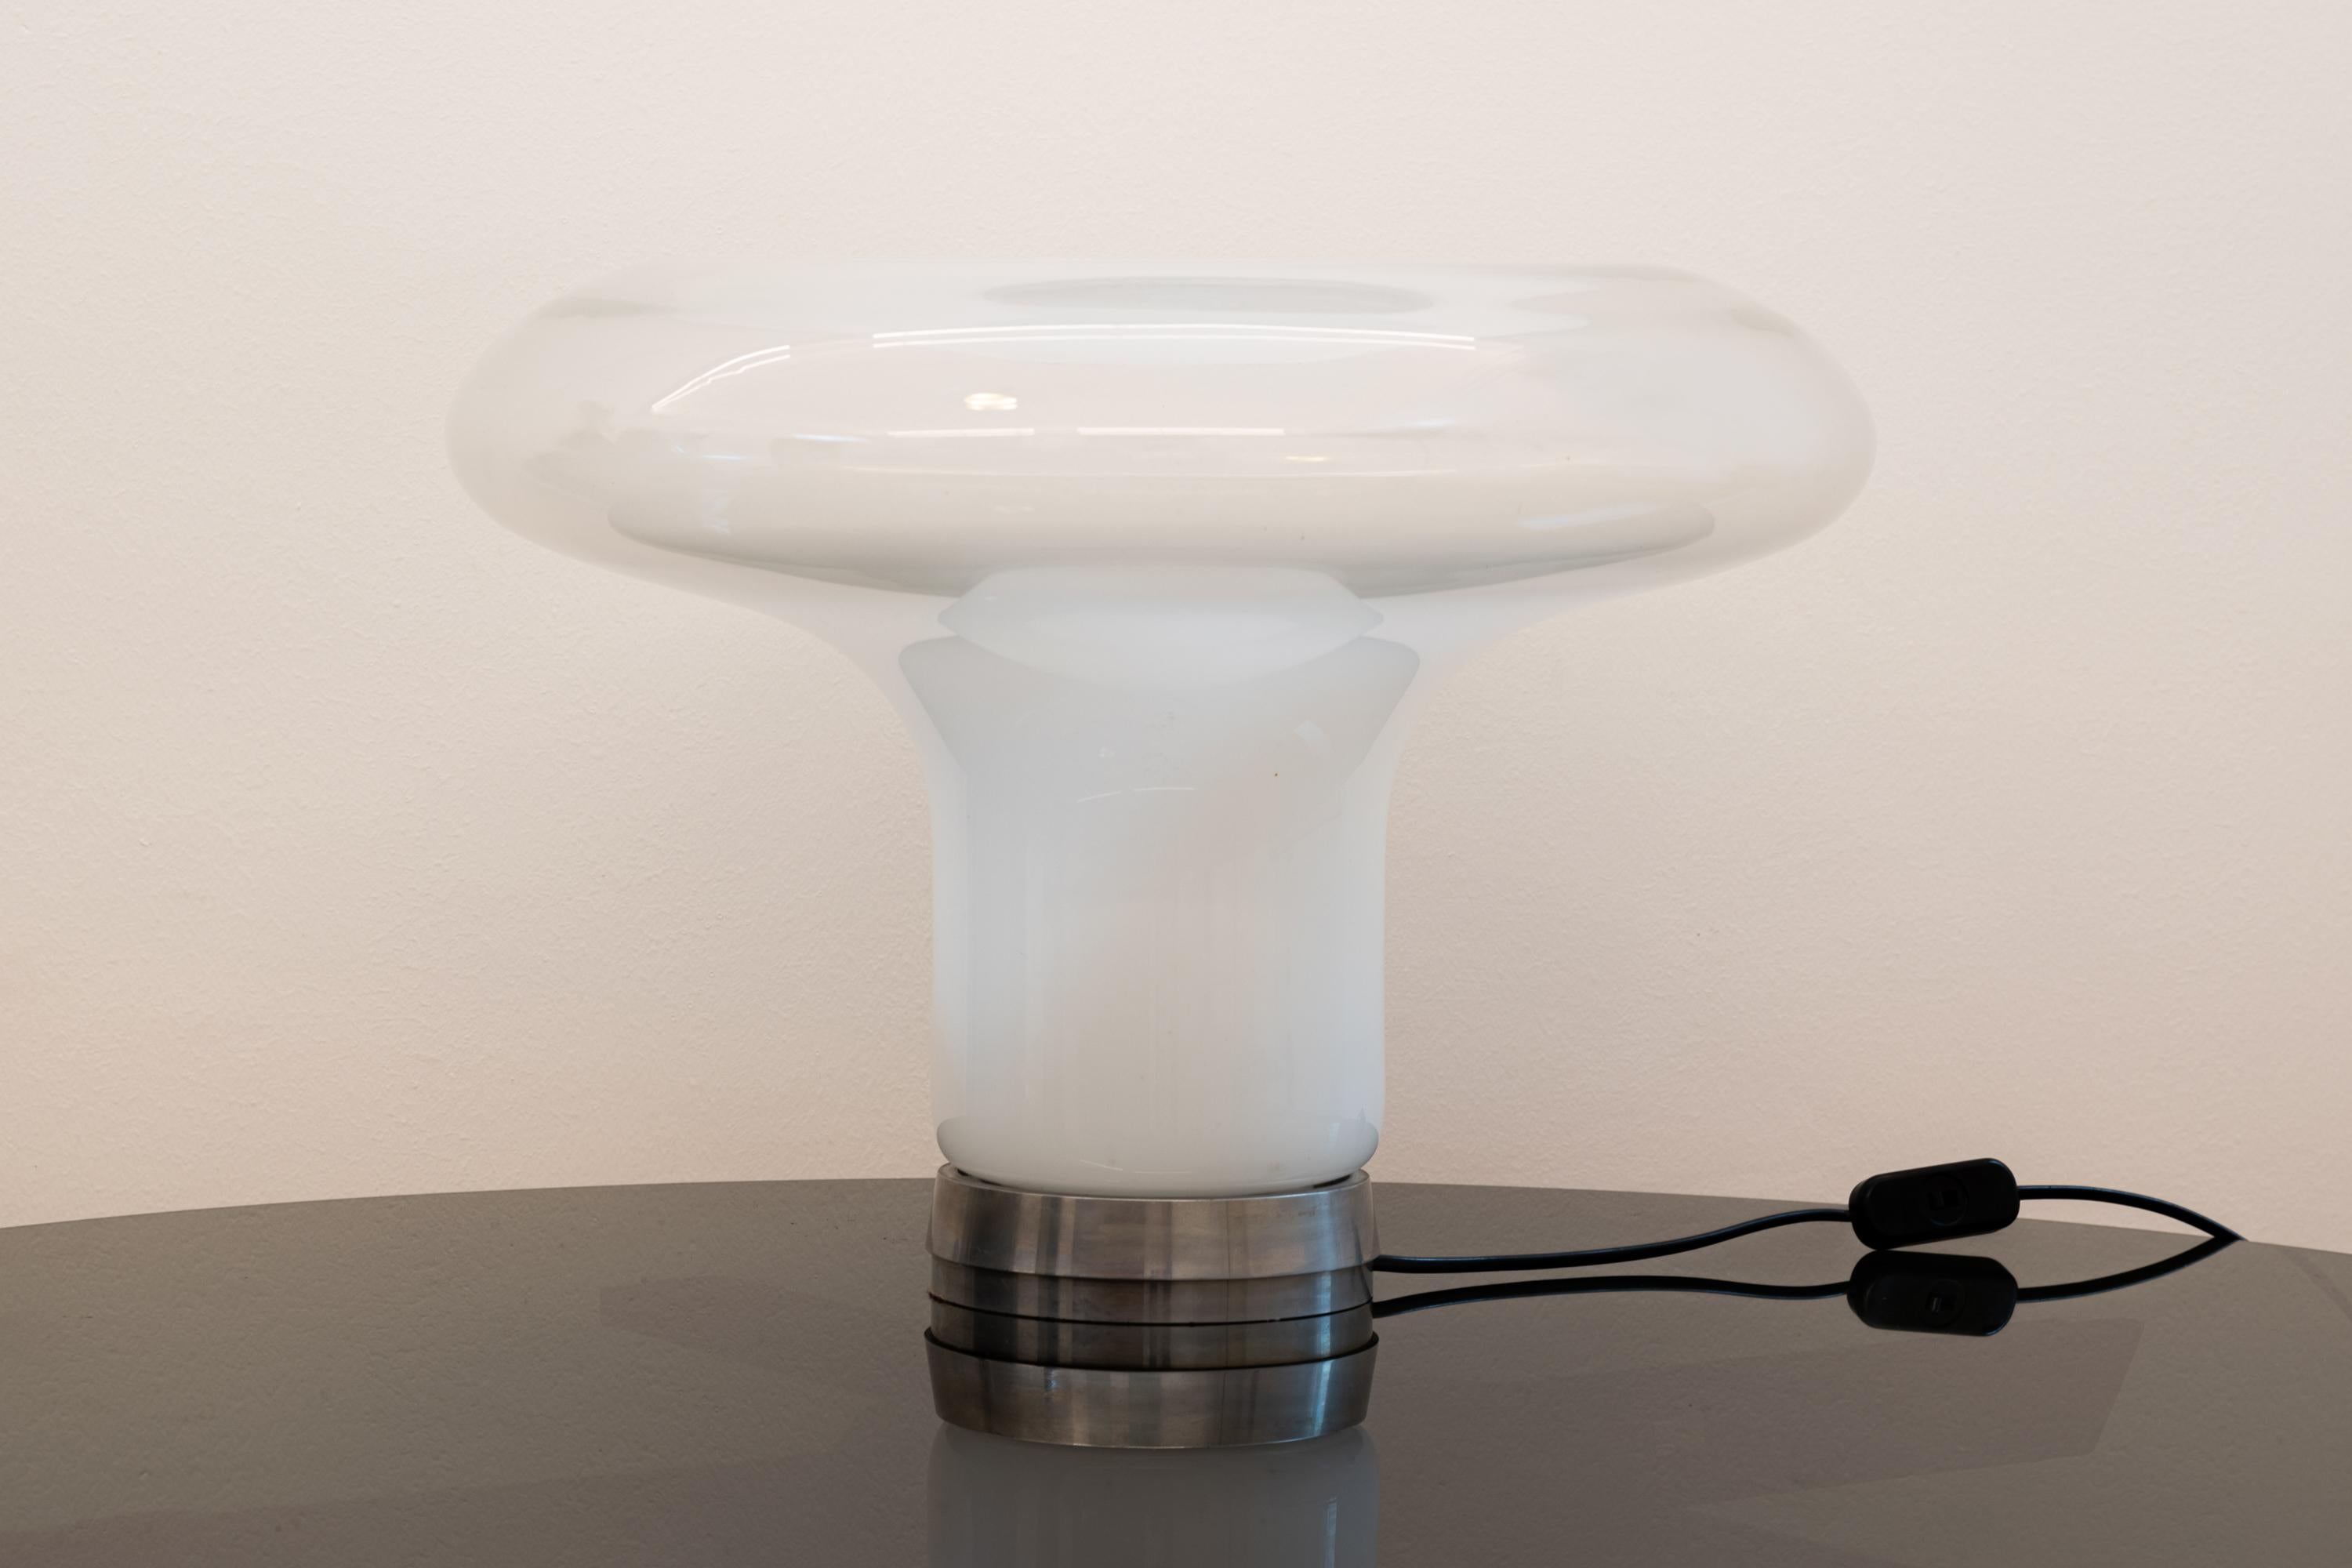 20th century Angelo Mangiarotti Lesbo table lamp in blown glass and chromed metal base.
Artemide Production, circa 1970, Italy. 
(With manufacturer brand stamped under the base) 

Licterature: Giuliana Gramigna, Repertorio del Design